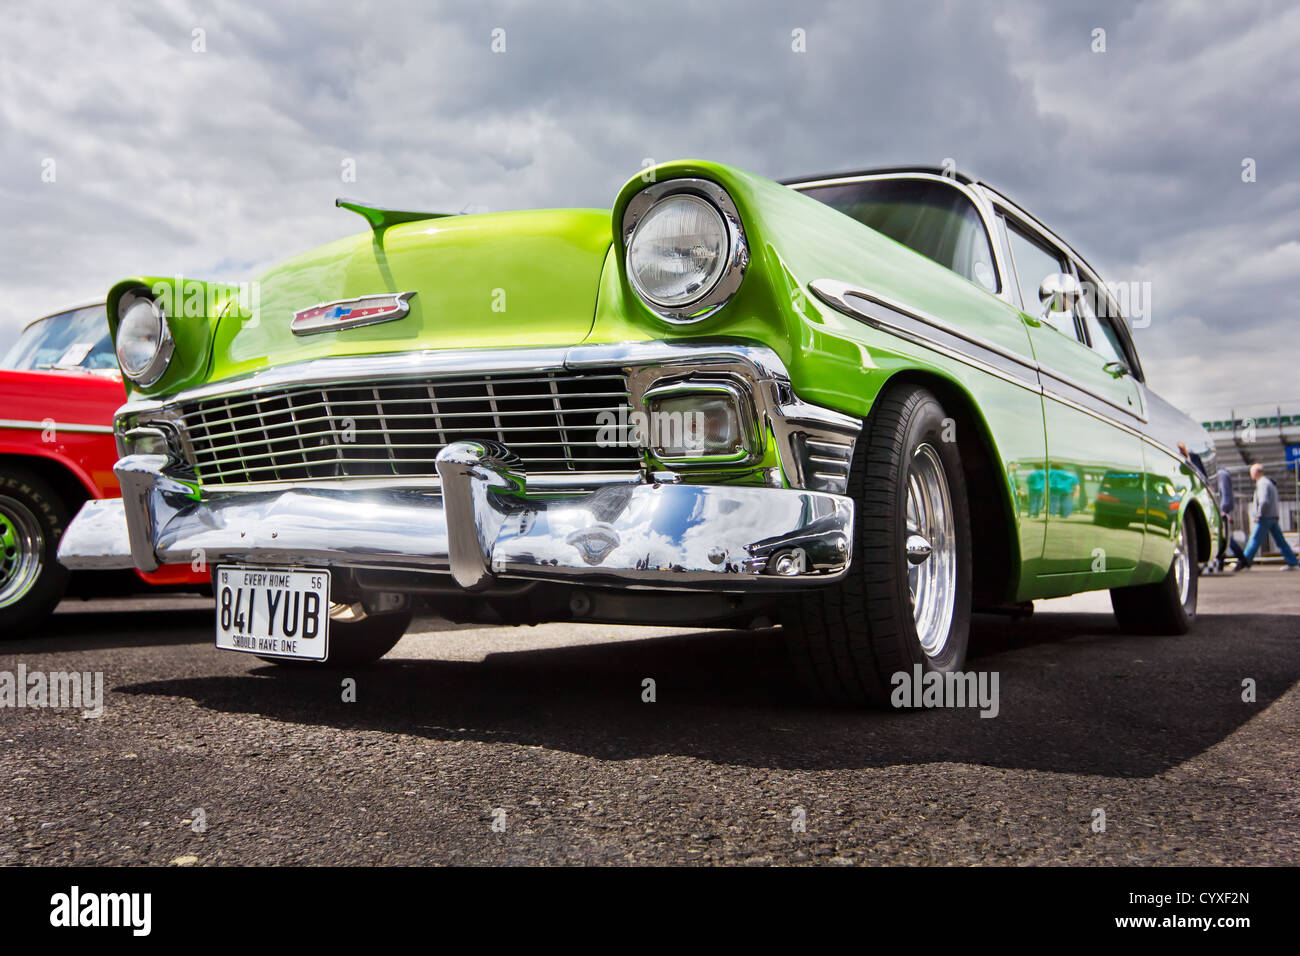 NORTHAMPTONSHIRE, UK- JULY 15: A 1956 Green Chevrolet Bel Air in a Show and Shine competition at the Dragstalgia event as Santa Stock Photo